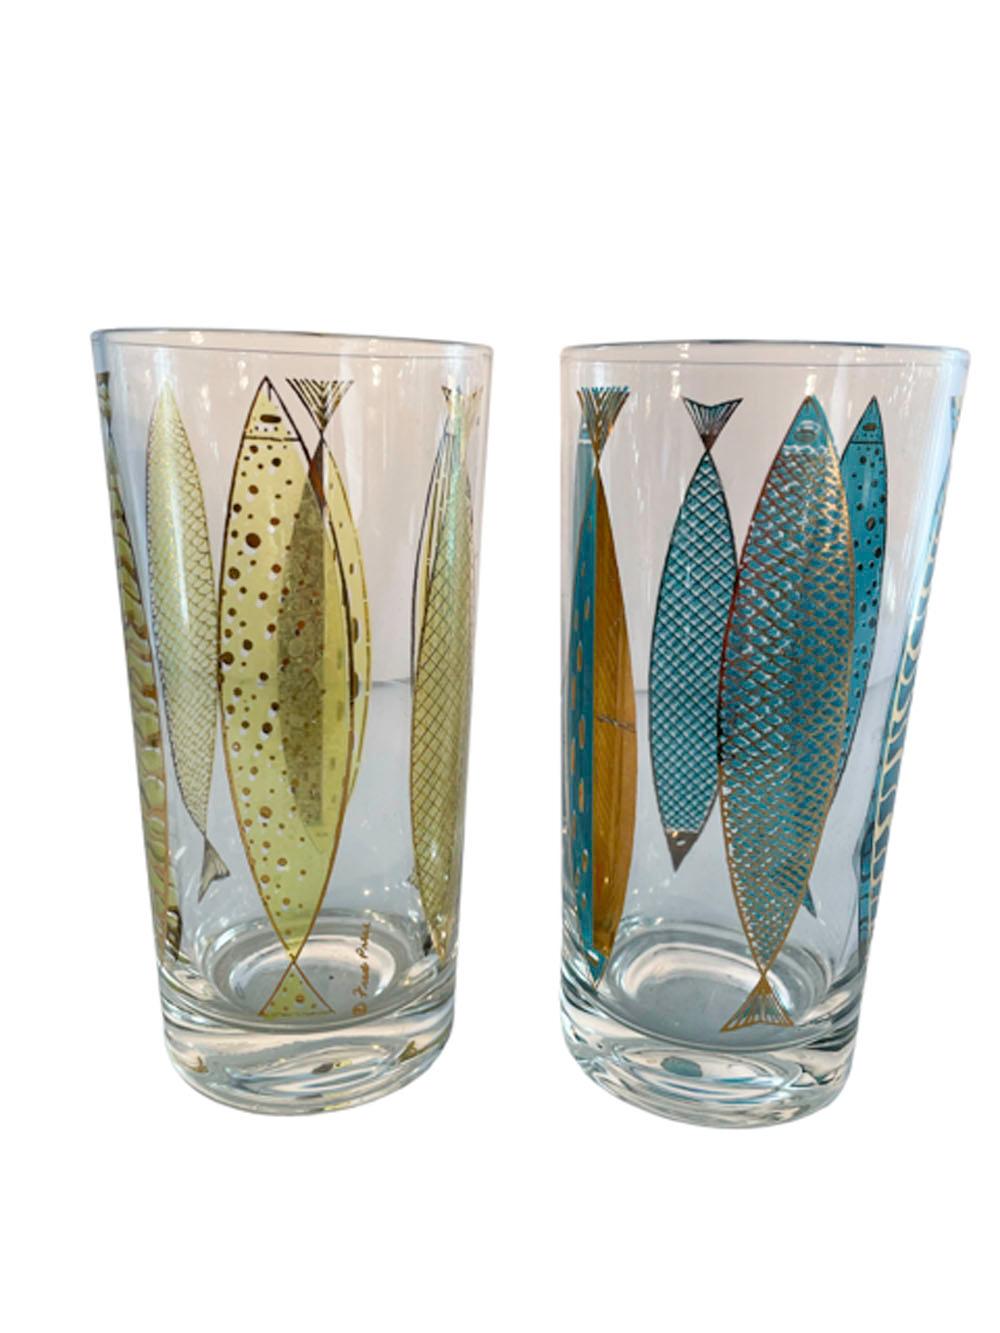 20th Century Mid-Century Modern Fred Press 'Gold Fish' Glasses with Translucent Colored Fish